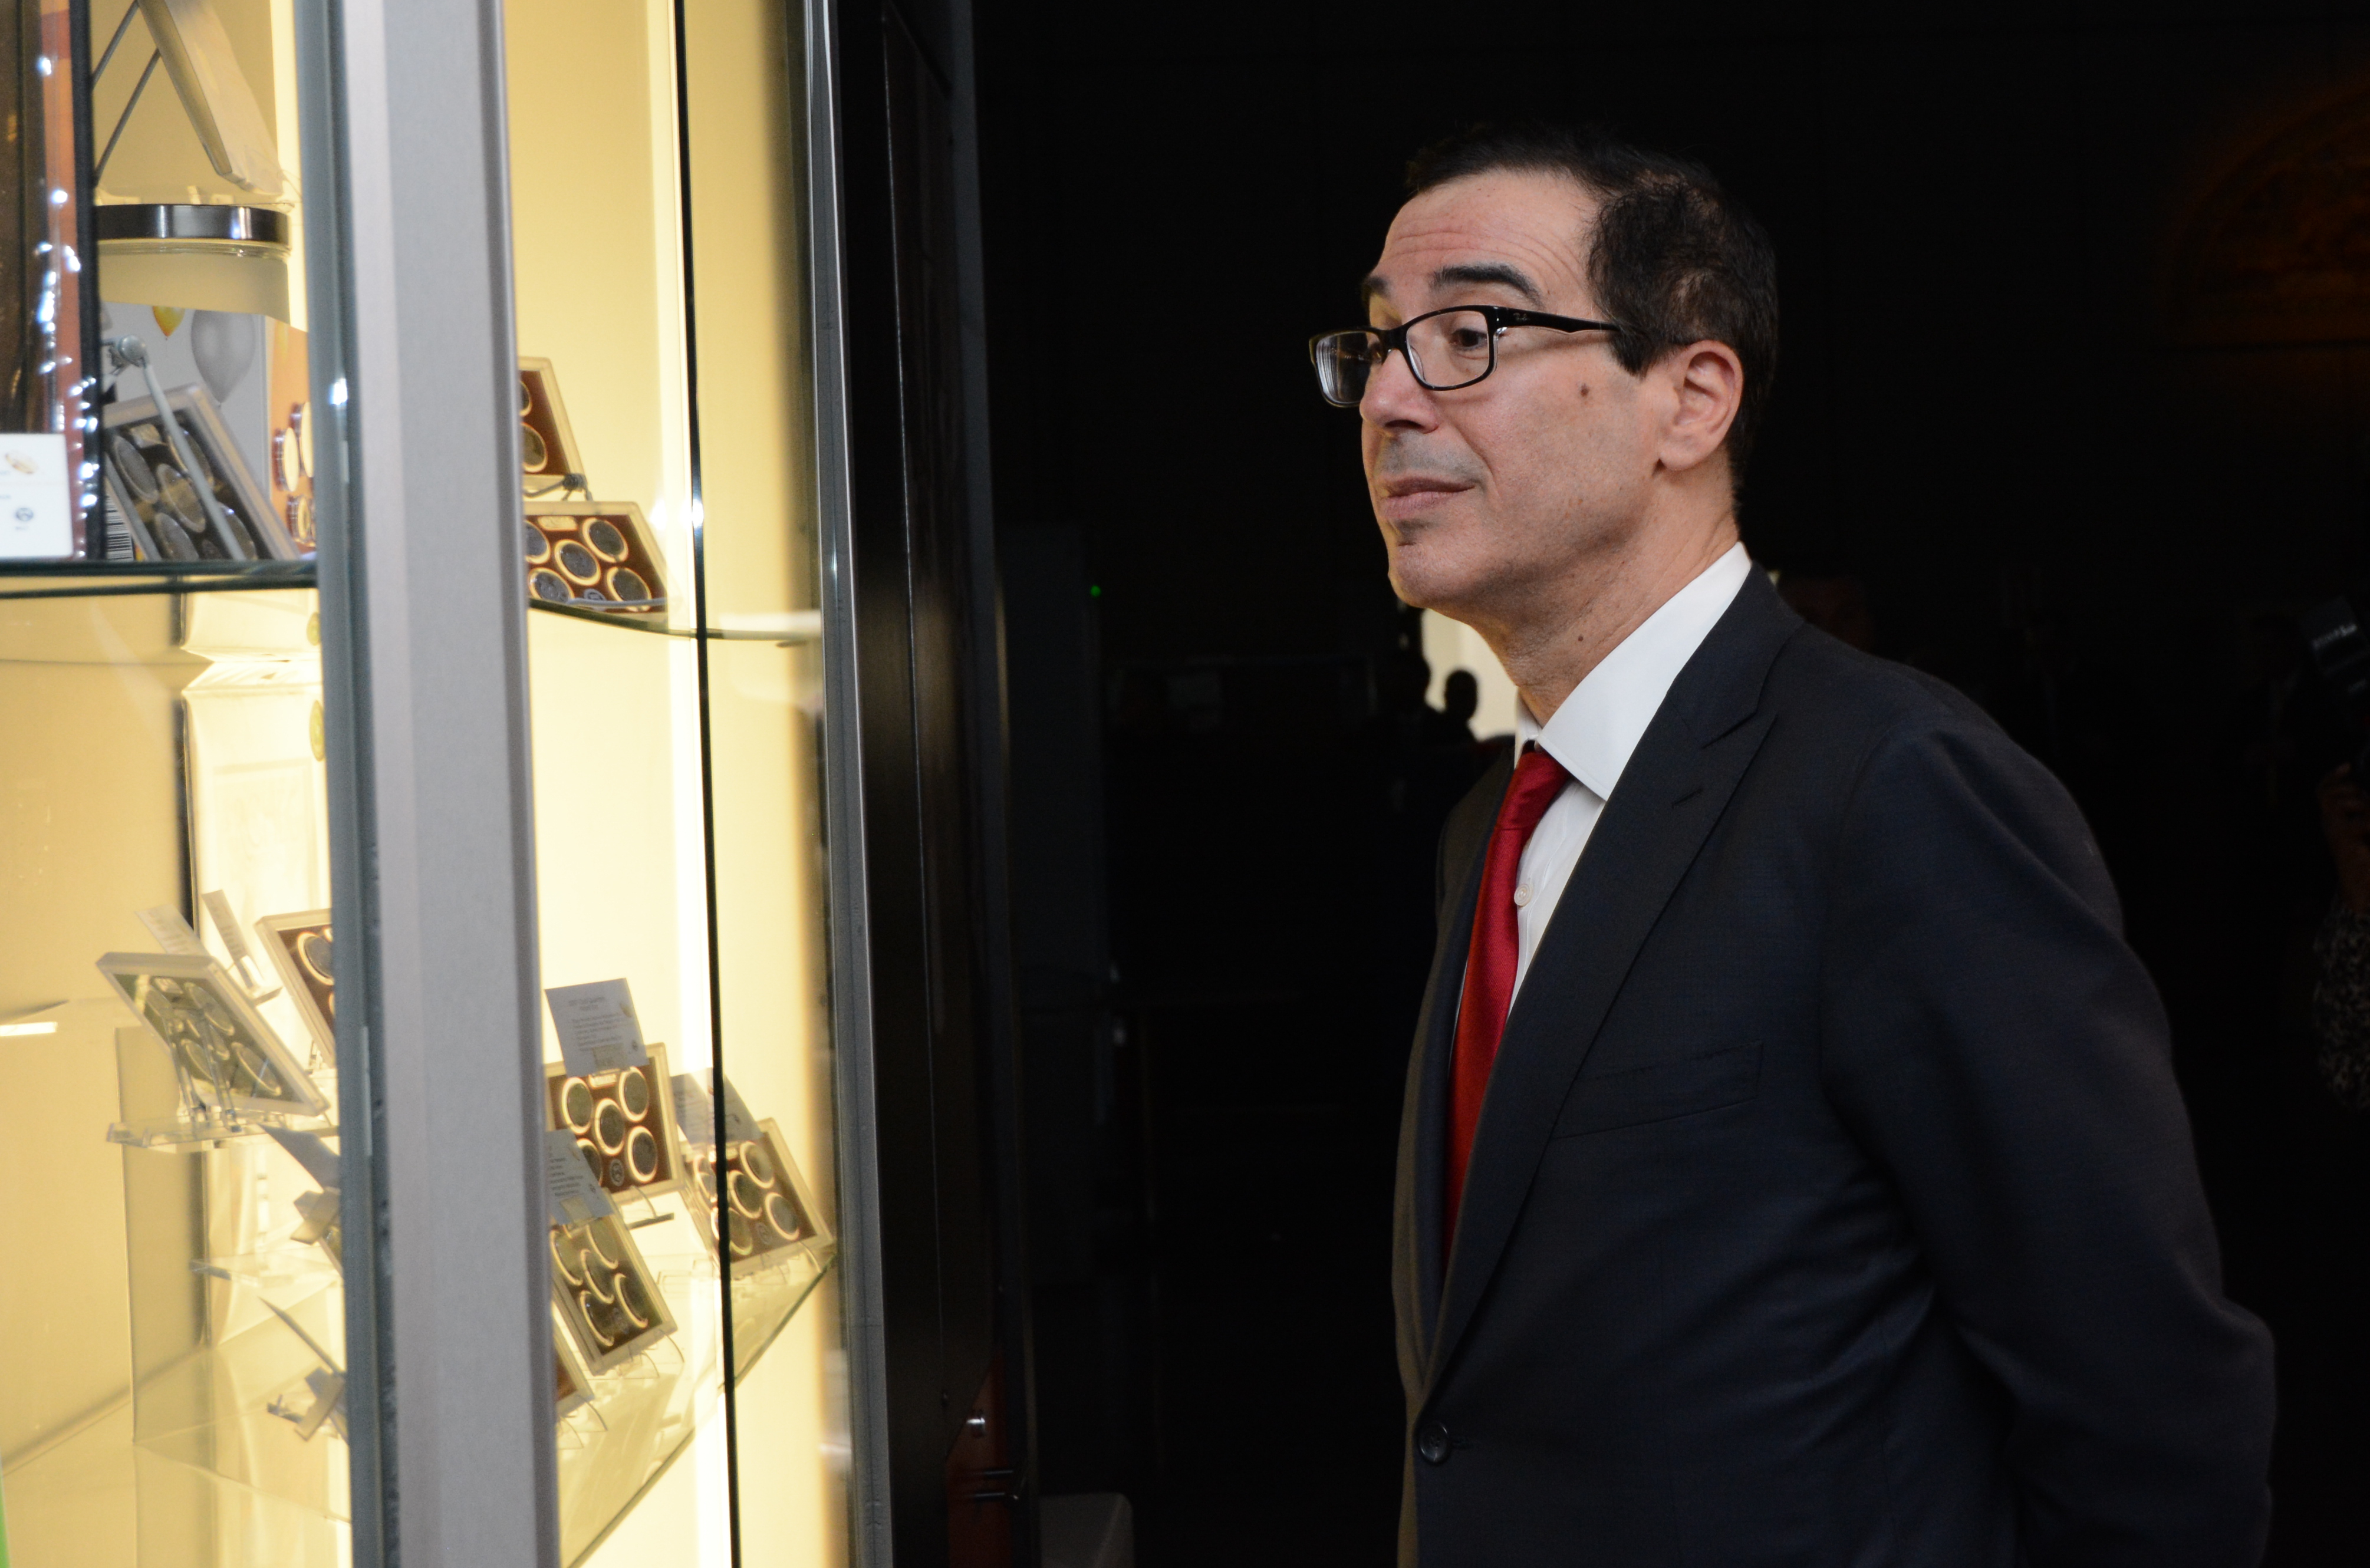 Treasury Secretary Steven Mnuchin looks at numismatic products at the gift shop following his visit of the U.S. Mint facility in Philadelphia. U.S. Mint photo by Jill Westeyn.